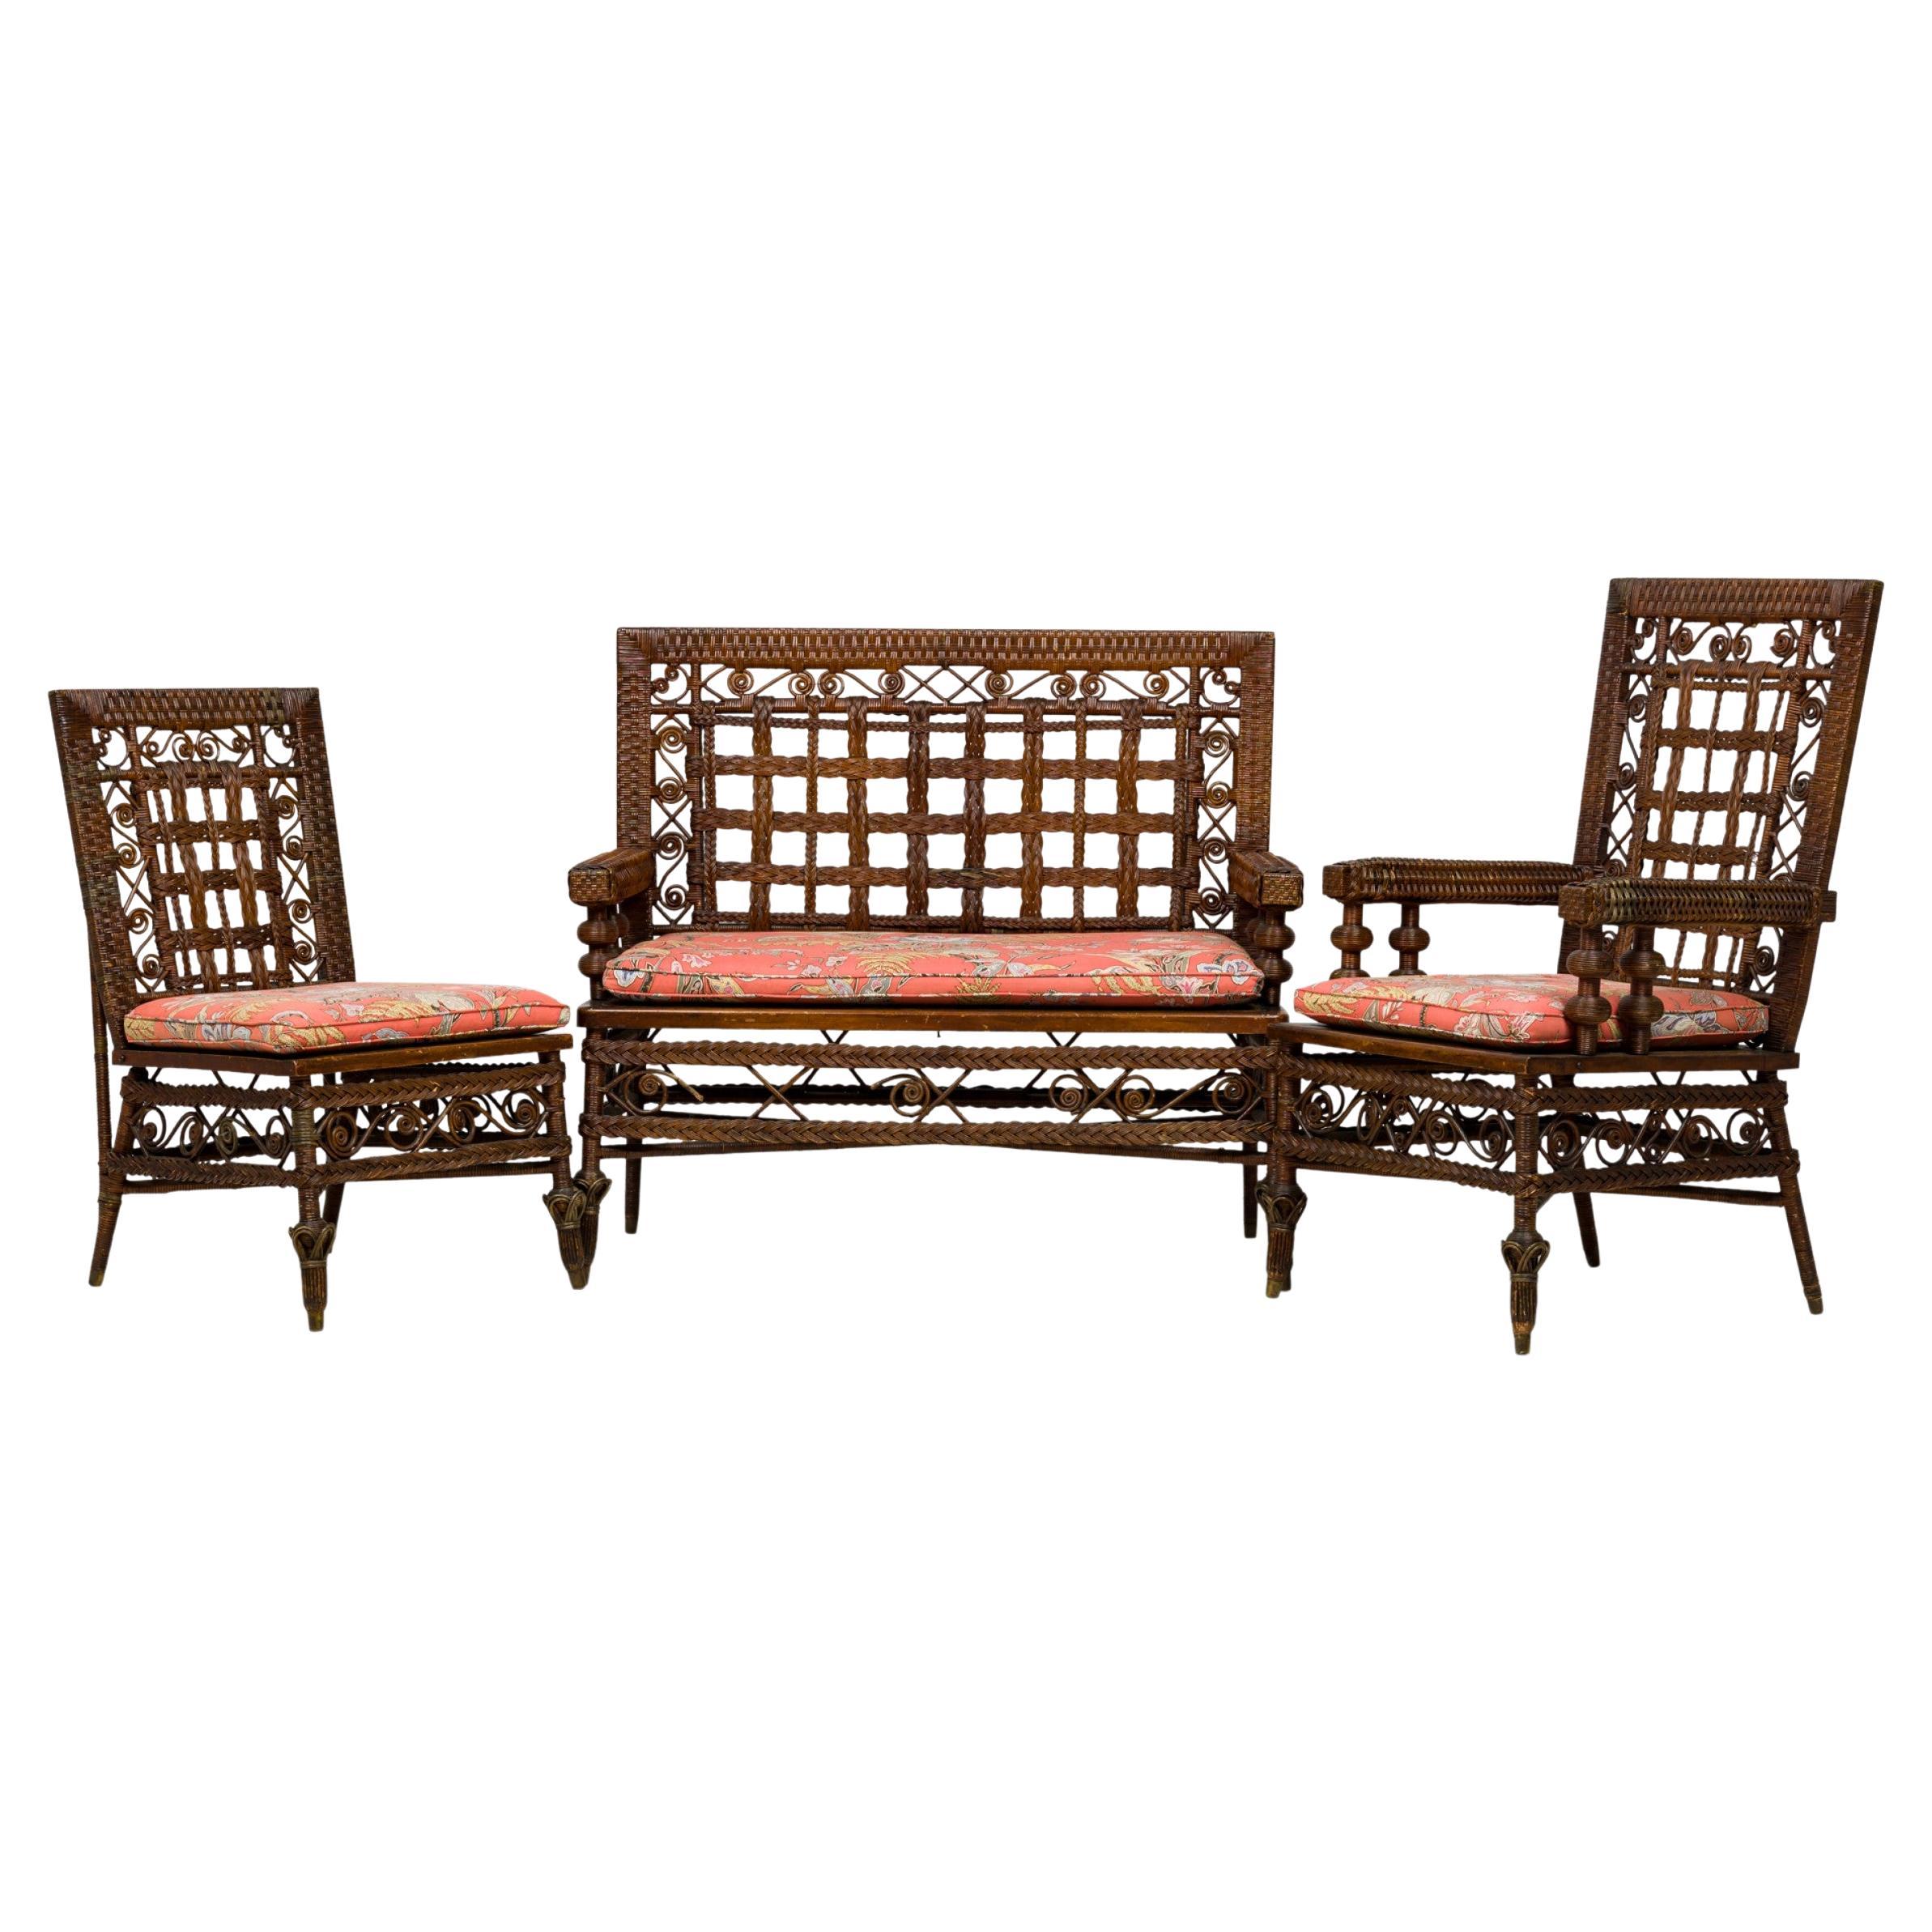 3 Piece American Victorian Braided Wicker Scroll and Lattice Design Seating Set  For Sale